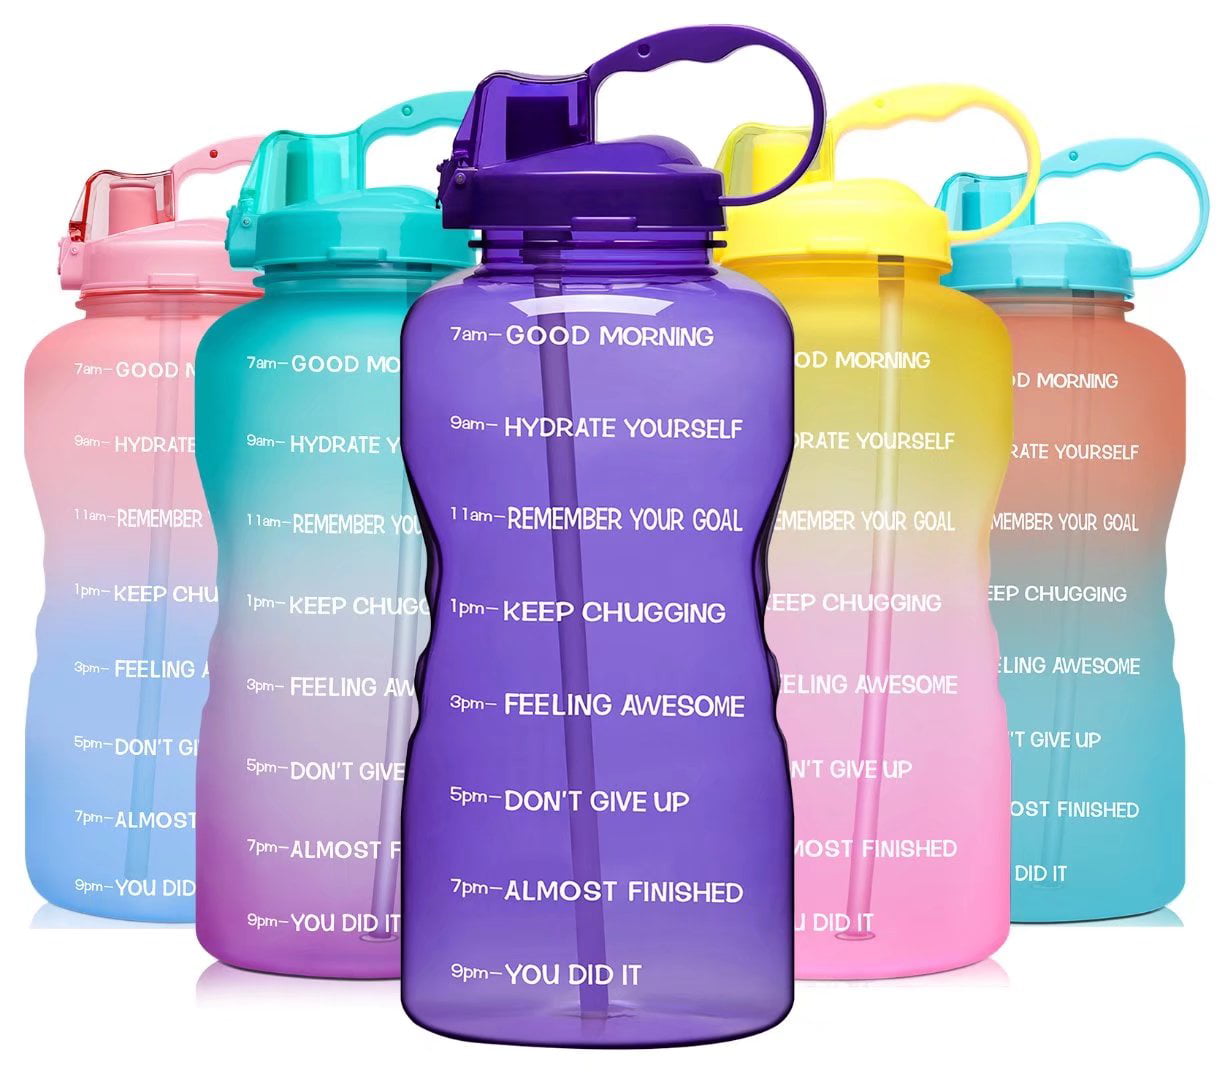 This $24 Motivational Water Bottle Has 19,300 5-Star Reviews on